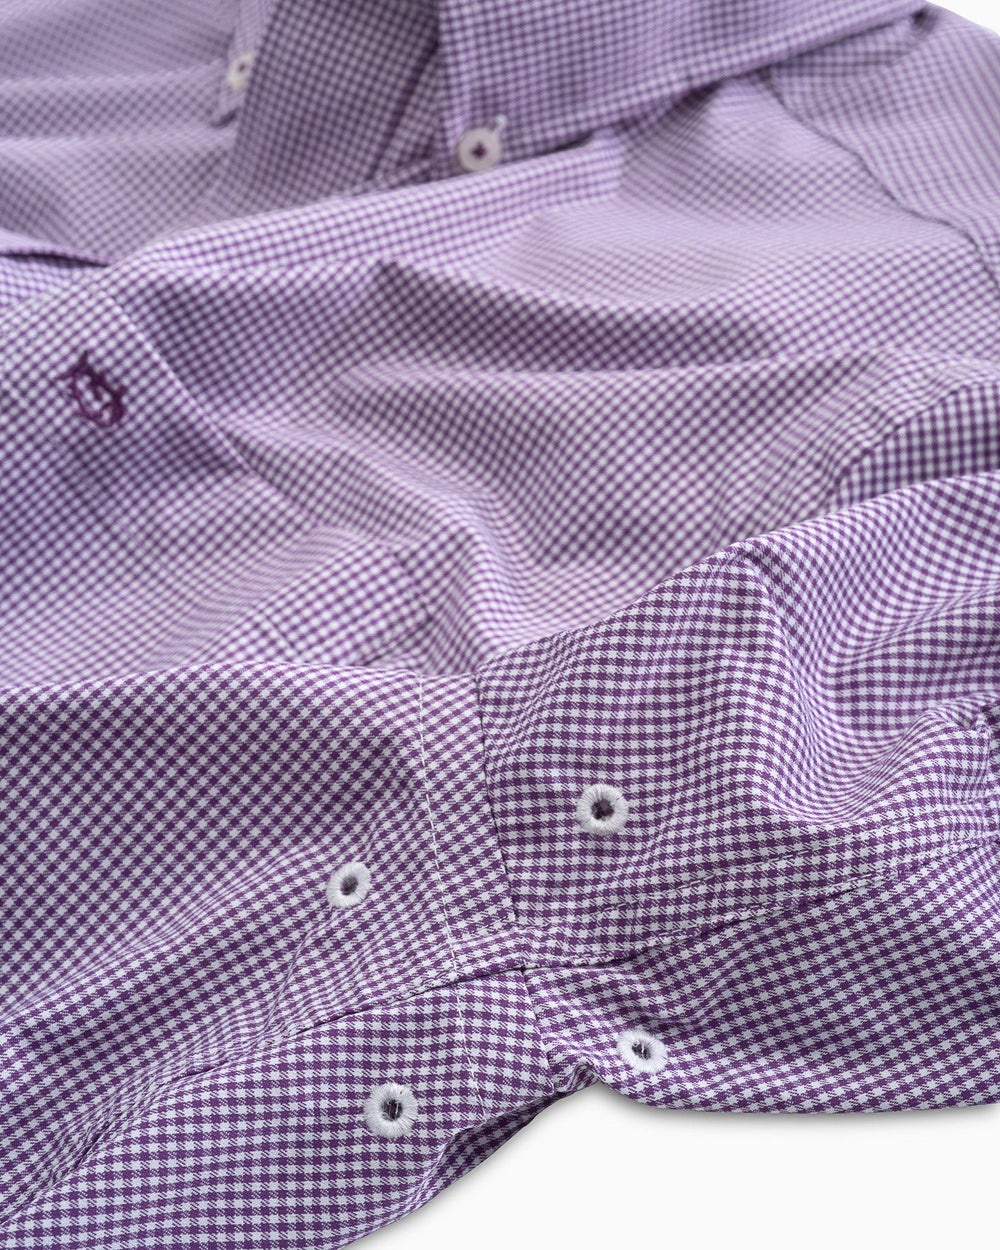 Arm vents of the Men's Purple Micro Gingham Intercoastal Performance Sport Shirt by Southern Tide - royal purple